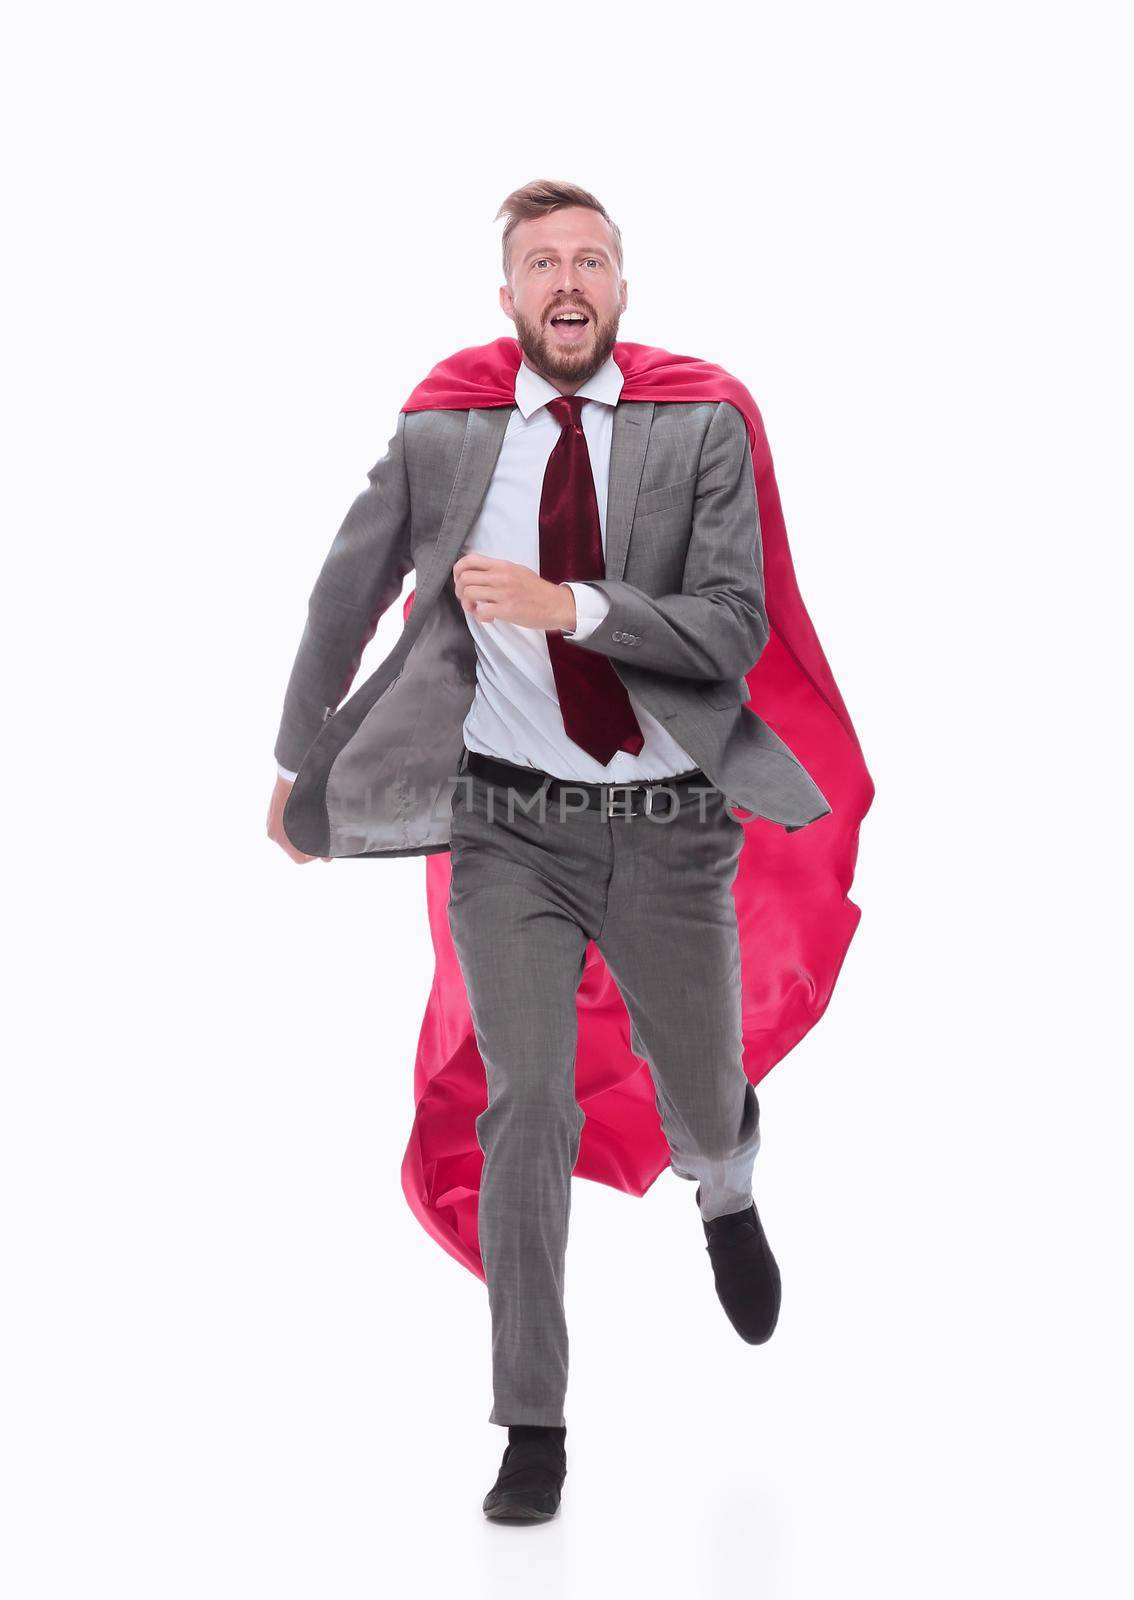 in full growth. serious businessman in a superhero raincoat striding confidently forward.